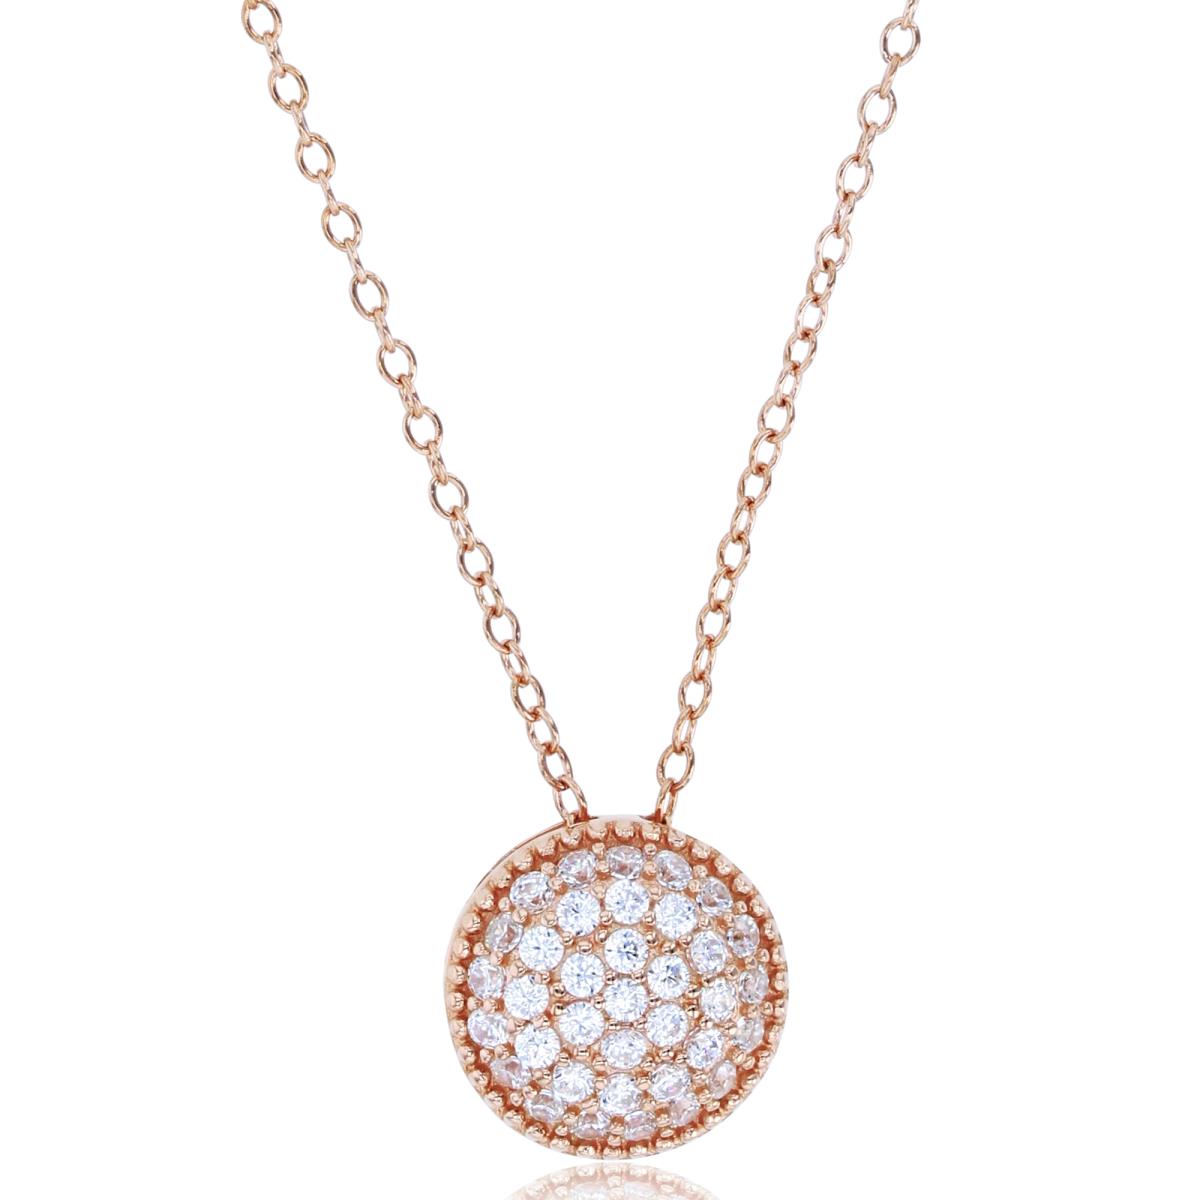 Sterling Silver+1Micron Rose Gold Rnd CZ Pave Beaded Puffy Circle 18"Necklace